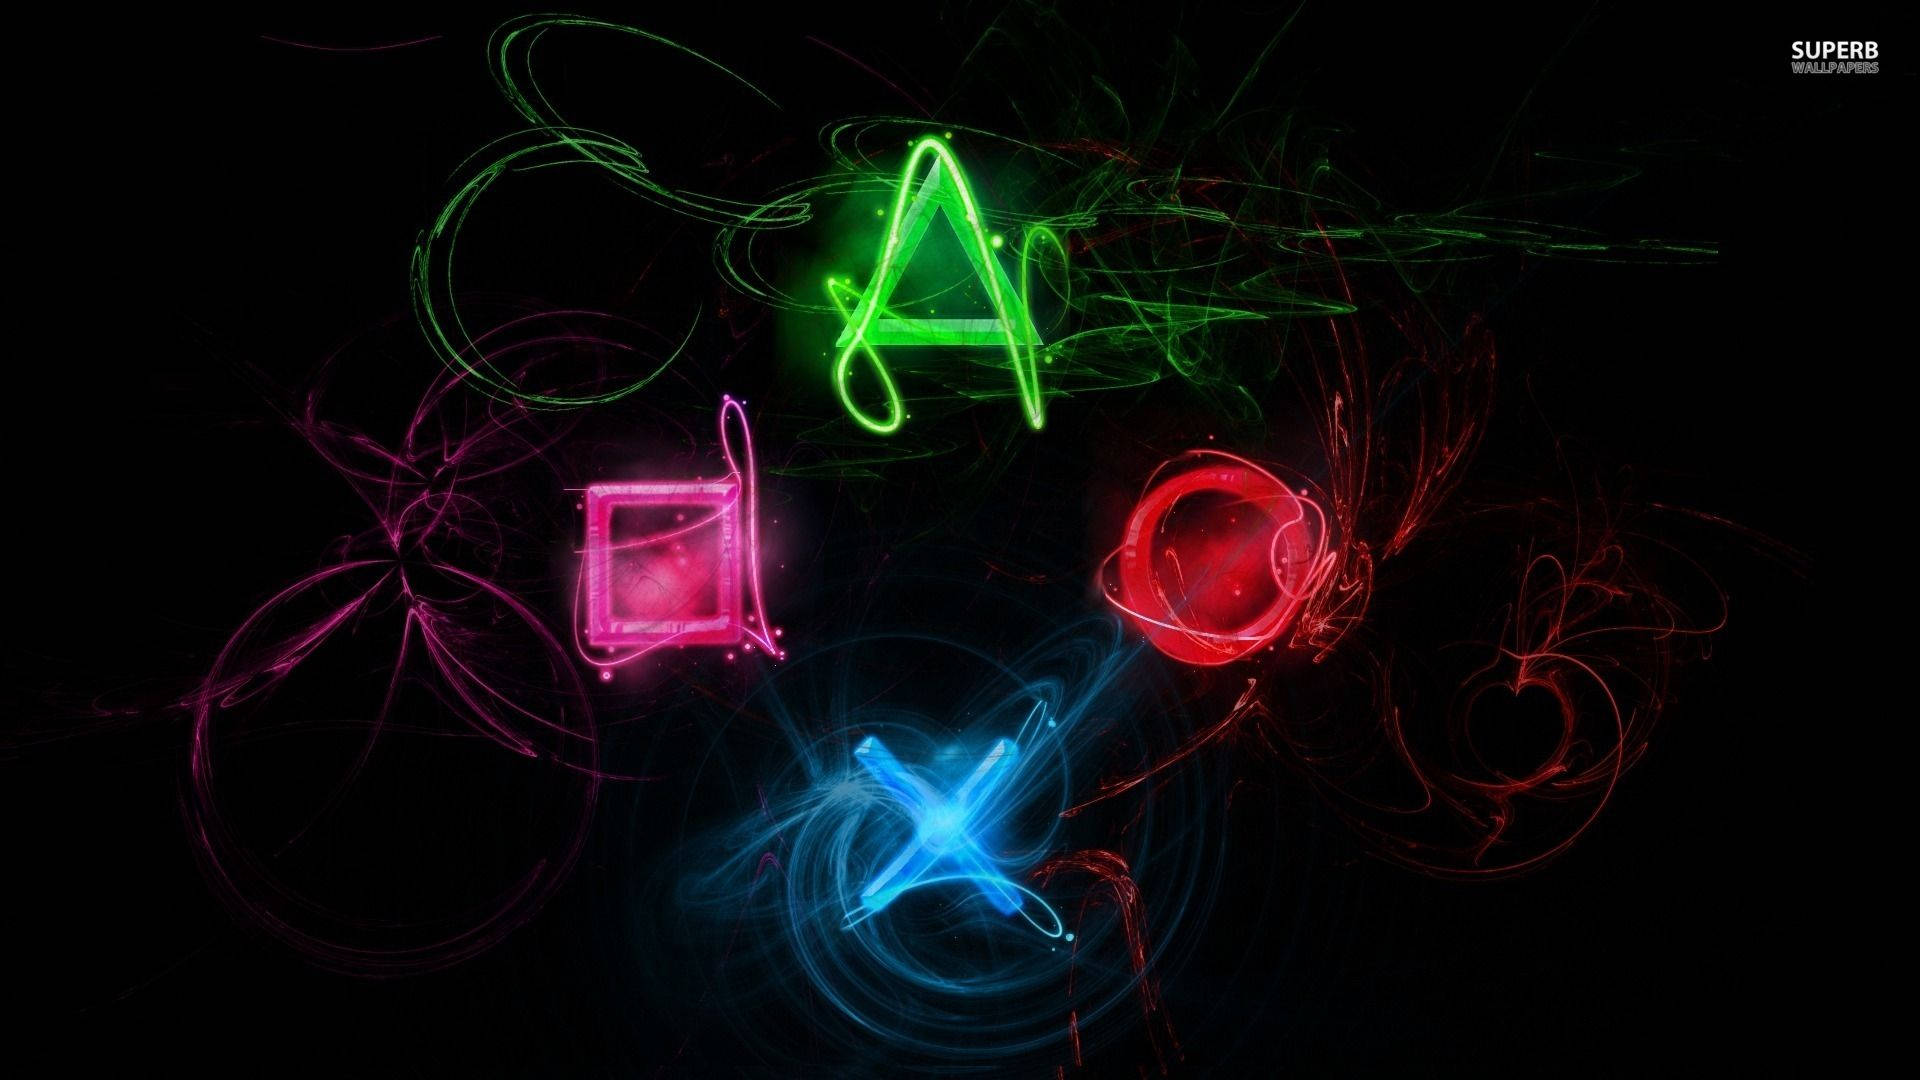 PS4 action buttons multi colored neon lights wallpaper.